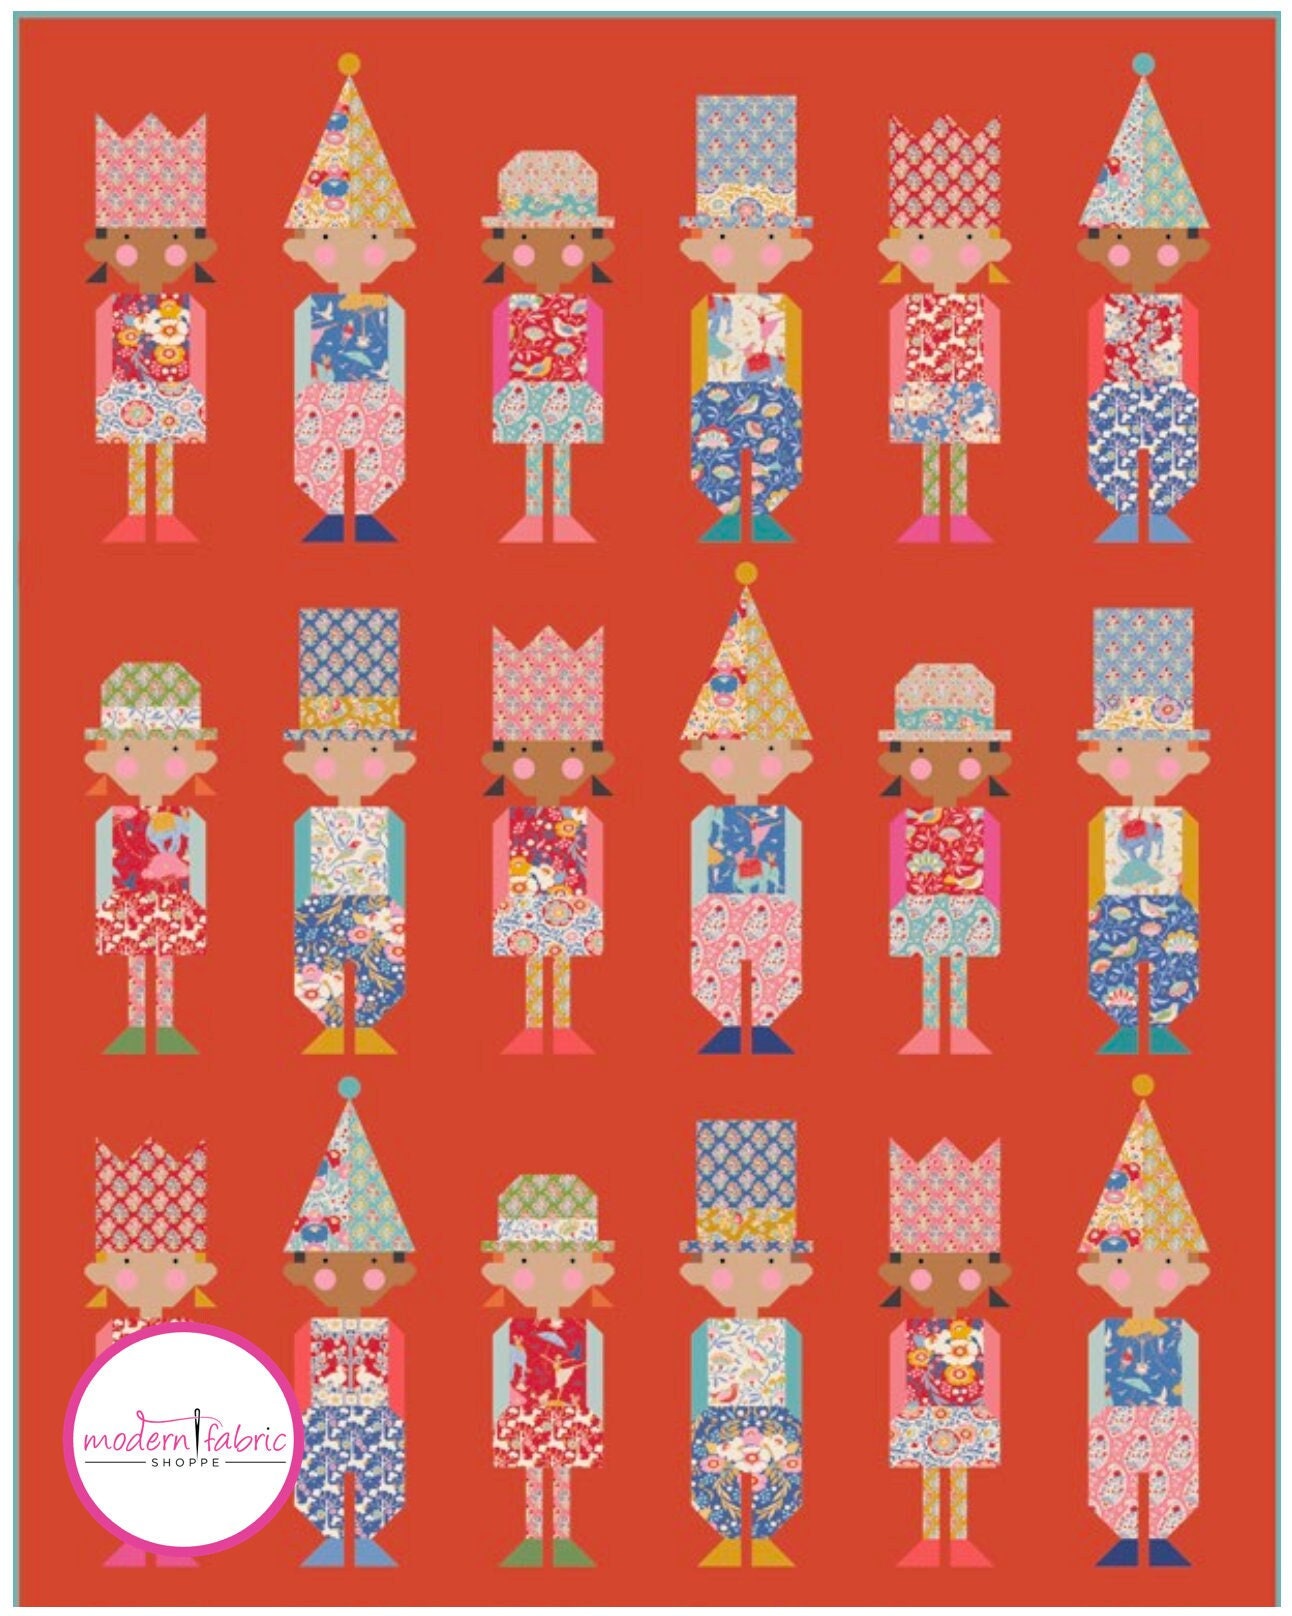 TILDA Fabric Cotton Beach “Collecting Seashells” Quilt Kit 56”x74” Complete  Kit Available Coral or Blue Colorway